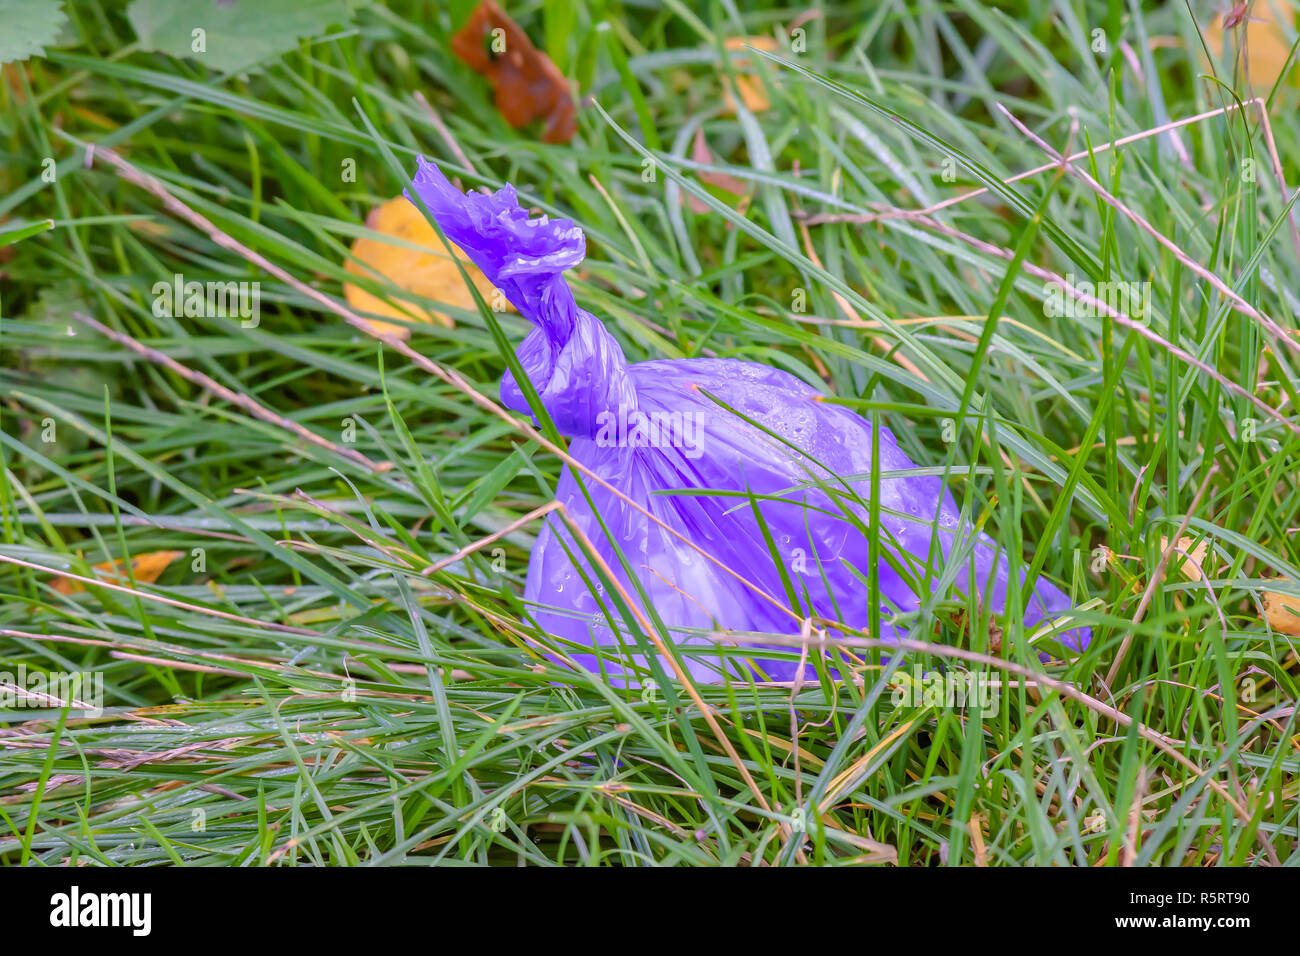 Plastic pollution, degradation of natural environment.Plastic bag containing dog fouling  left by careless dog owner on forest floor. Stock Photo